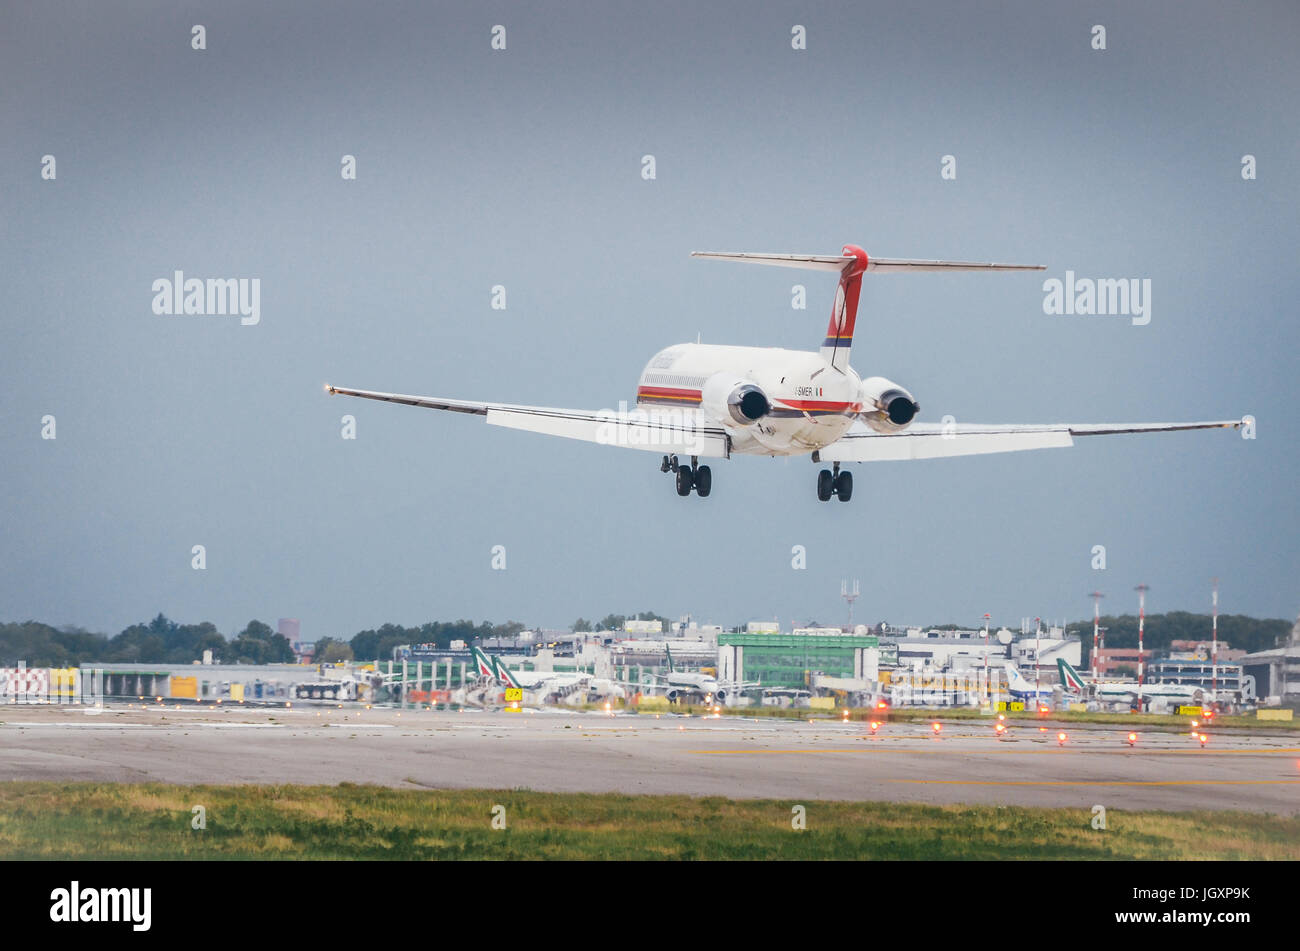 A Meridiana airliner commercial airplane lands at Milan's Linate airport Stock Photo